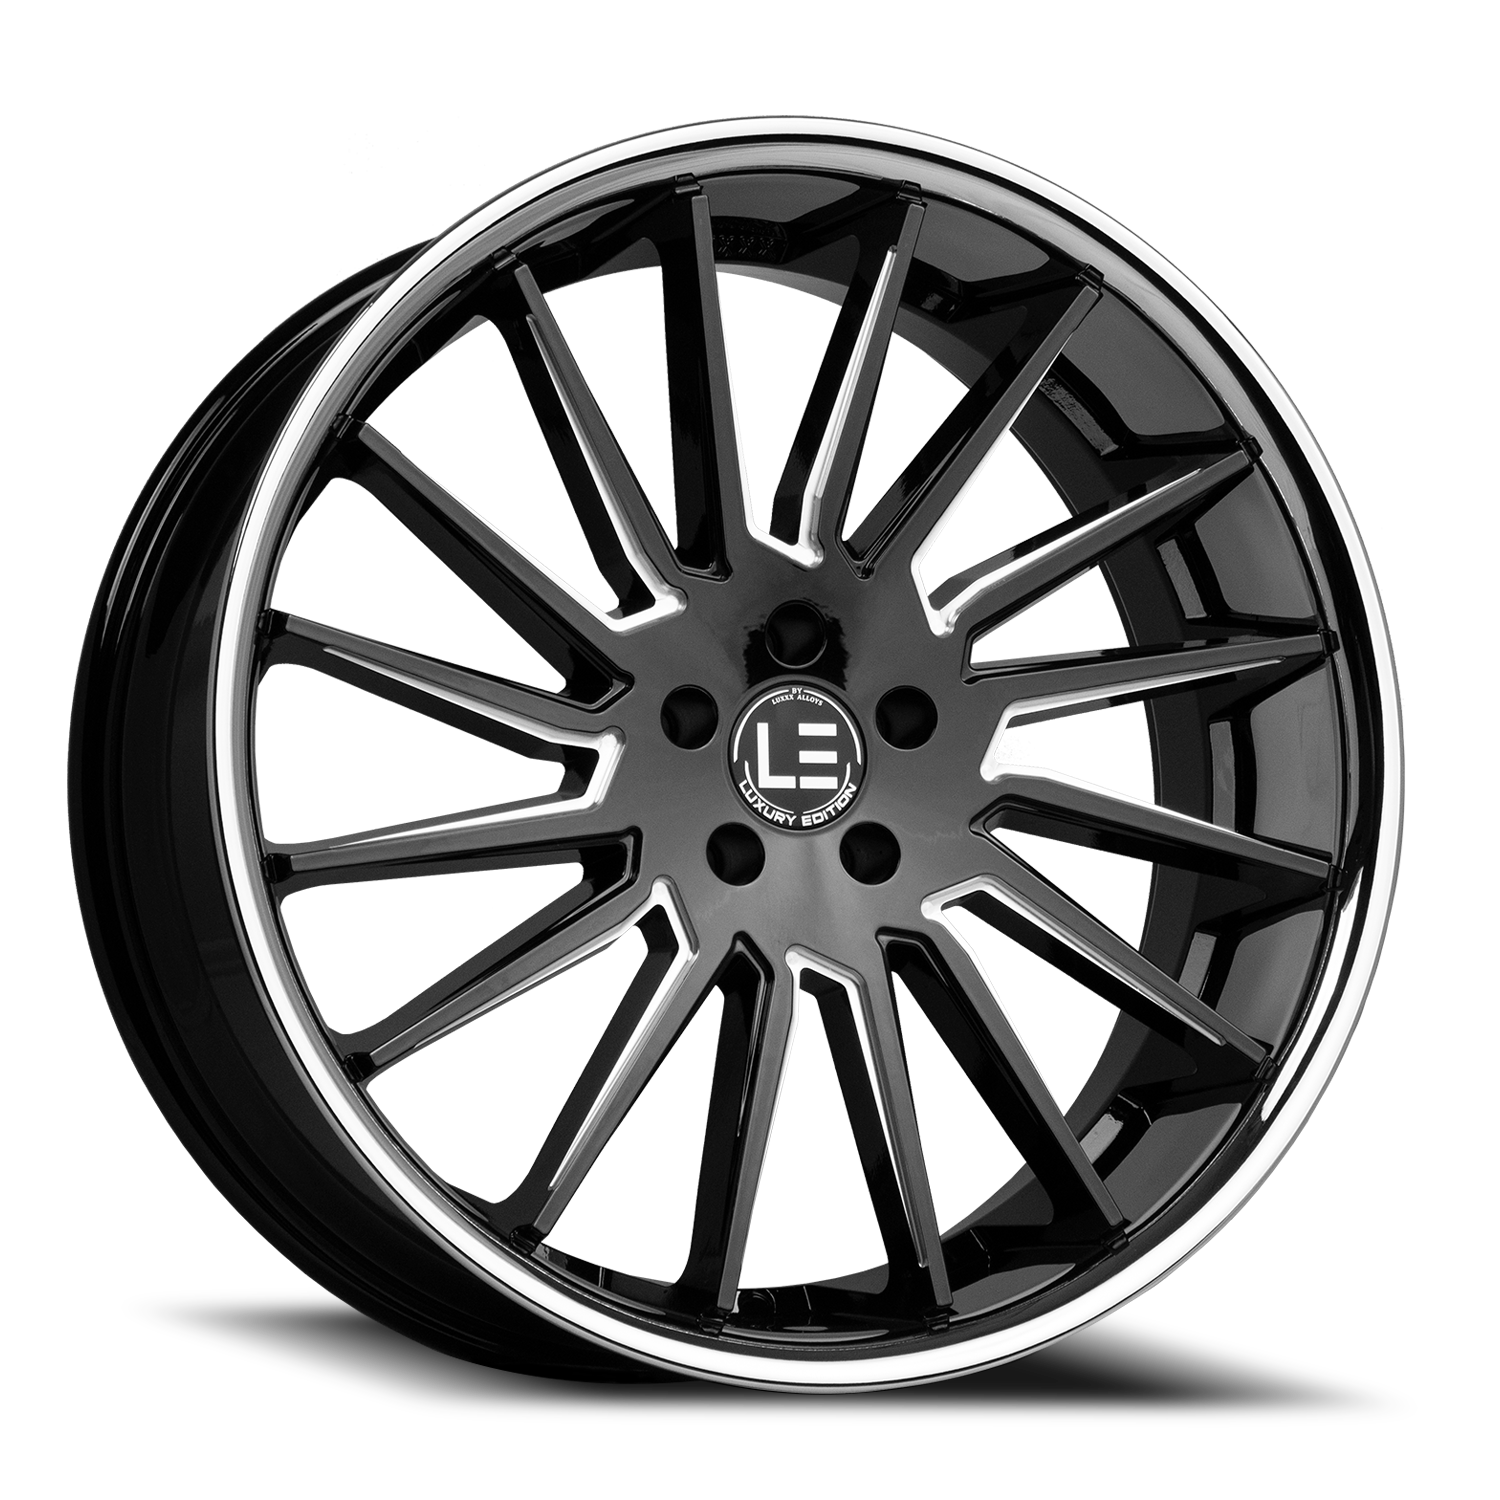 https://storage.googleapis.com/autosync-wheels/Luxxx_LE/9-GB_Gloss_Black_Stainless-Steel-Lip-Milled_5-lug_0001.png